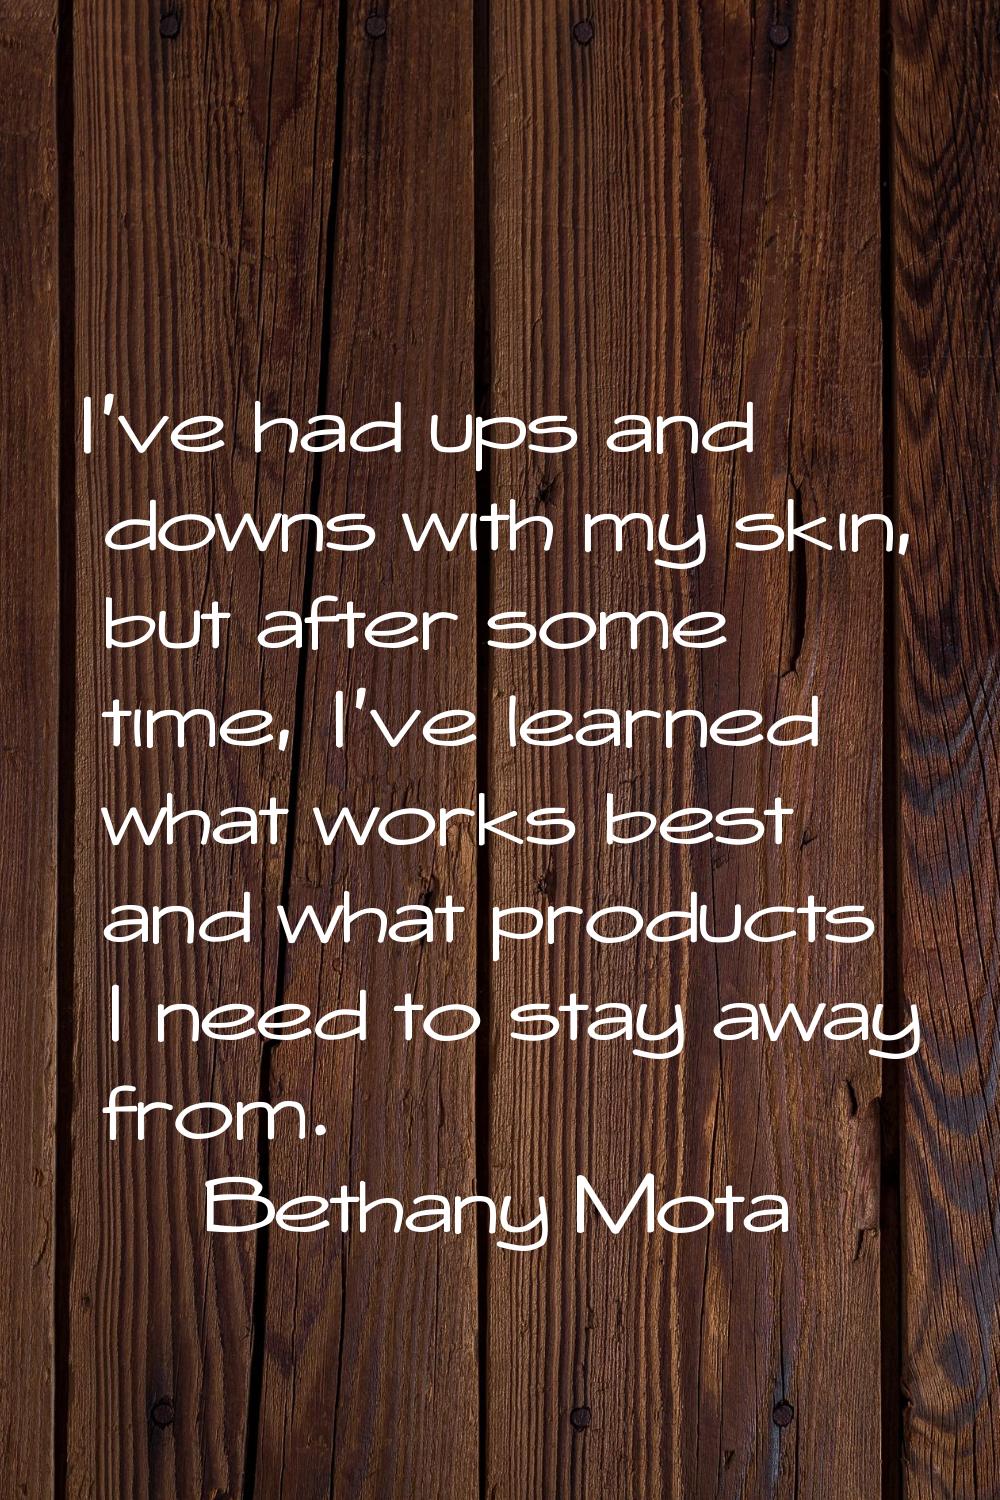 I've had ups and downs with my skin, but after some time, I've learned what works best and what pro